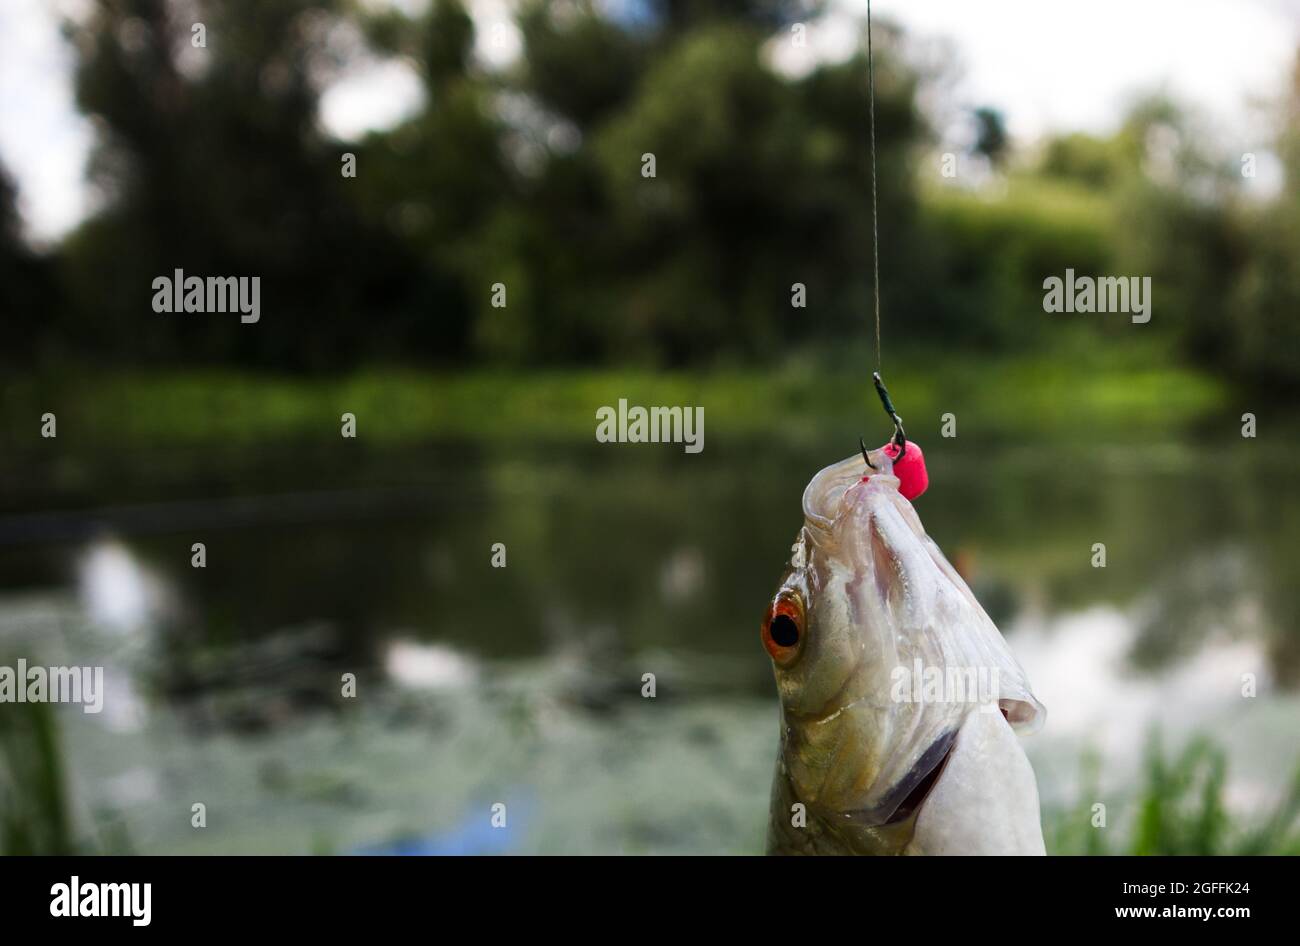 White fish hanging on a fishing line with a hook. Stock Photo by  ©George7423 313360614